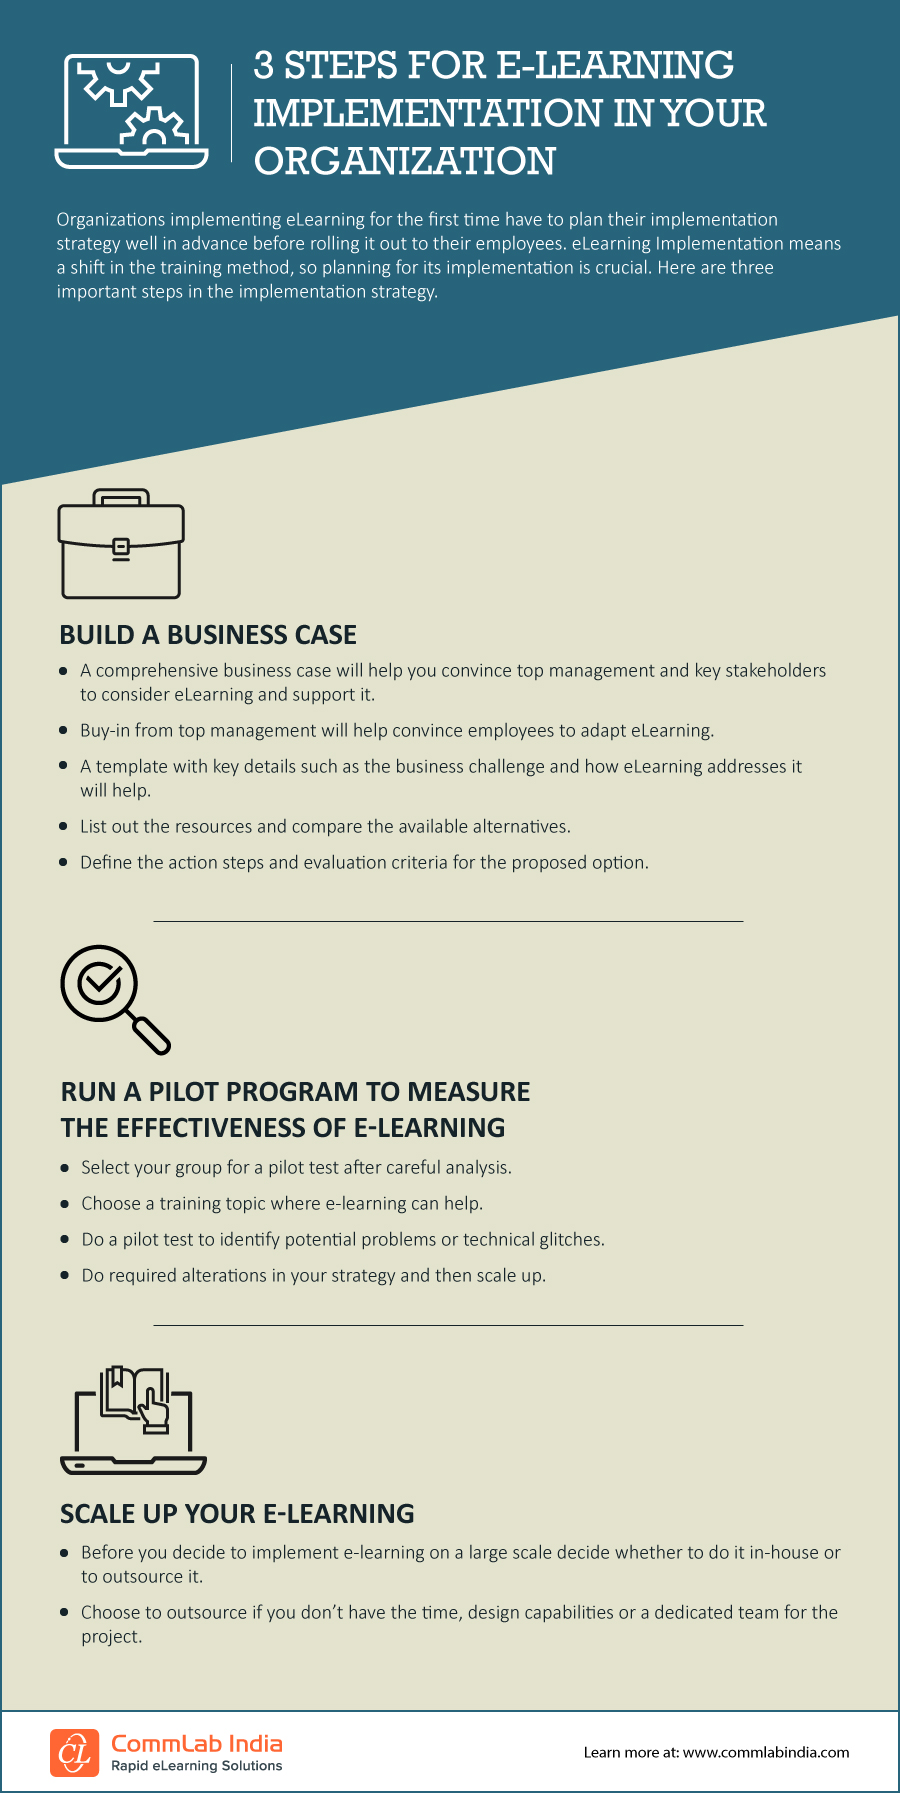 3 Steps for E-learning Implementation in Your Organization [Infographic]